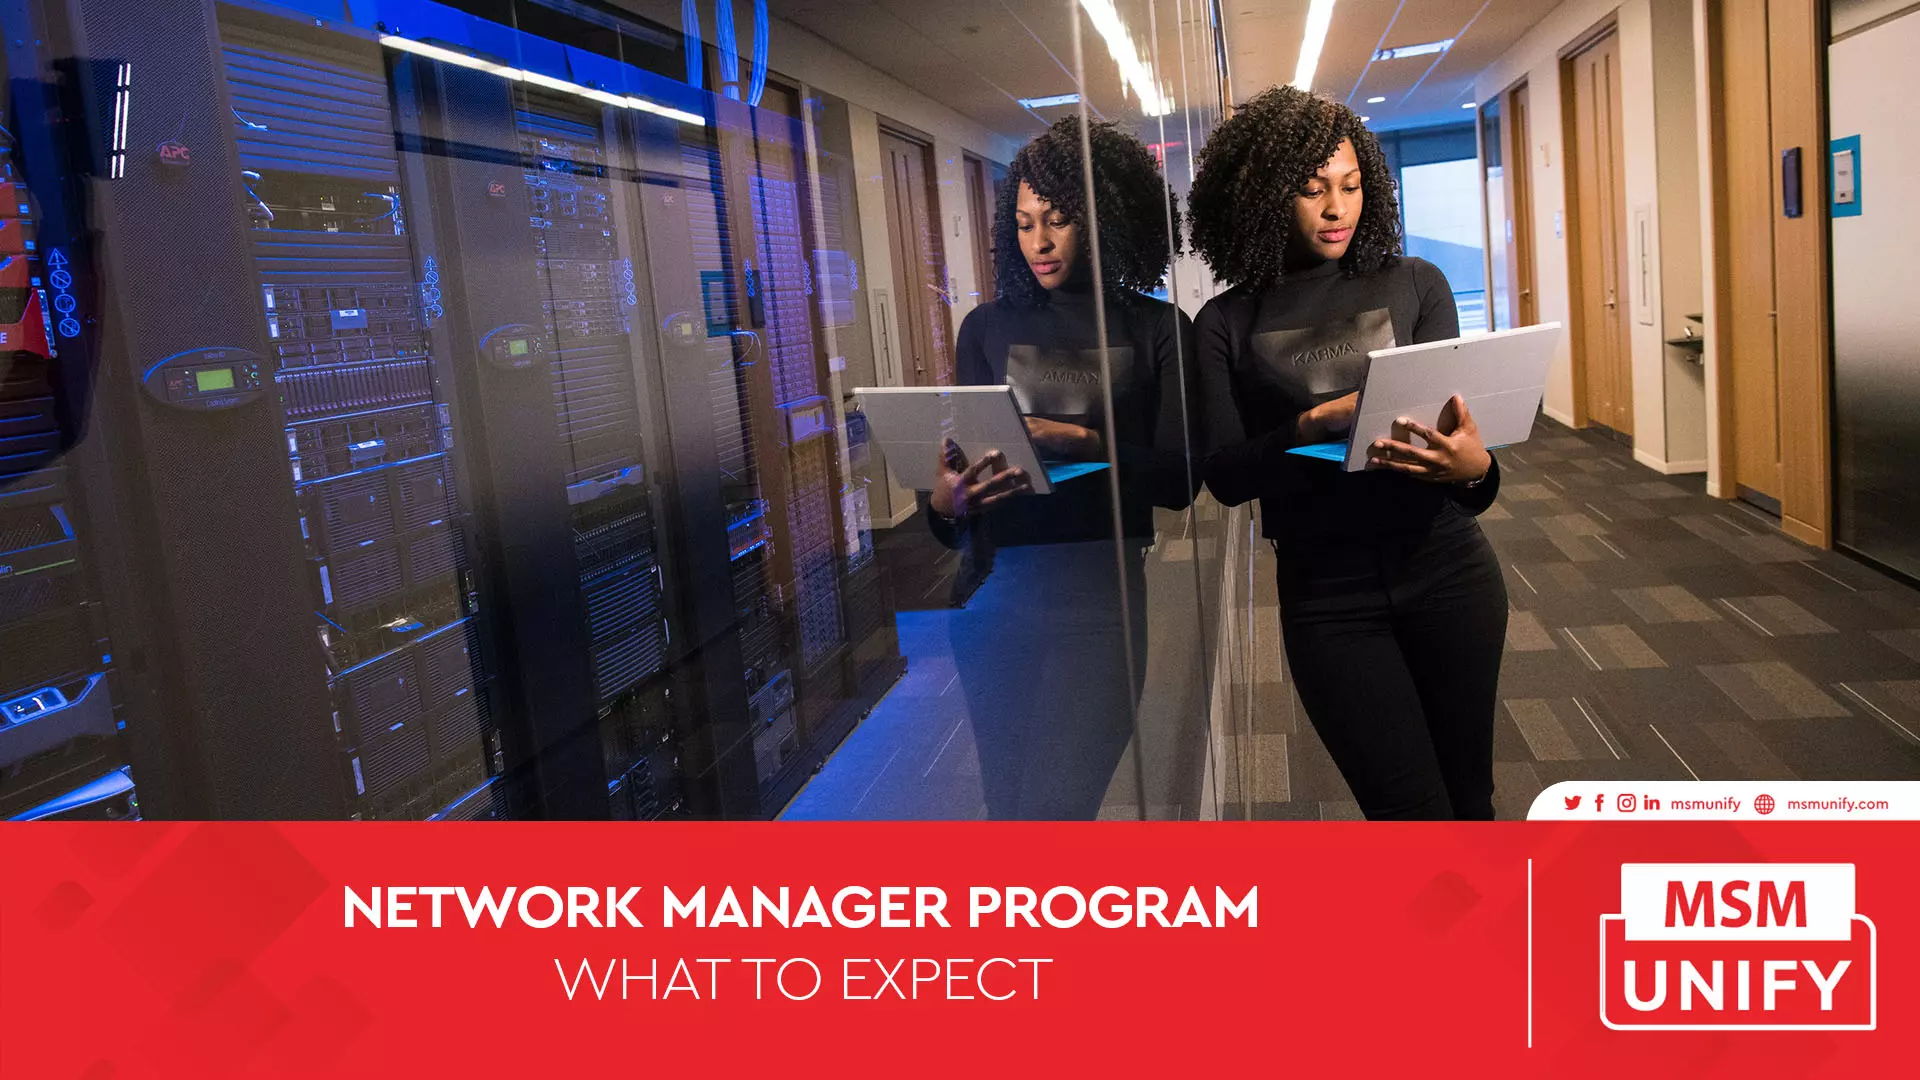 MSM Unify Network Manager Program What To Expect